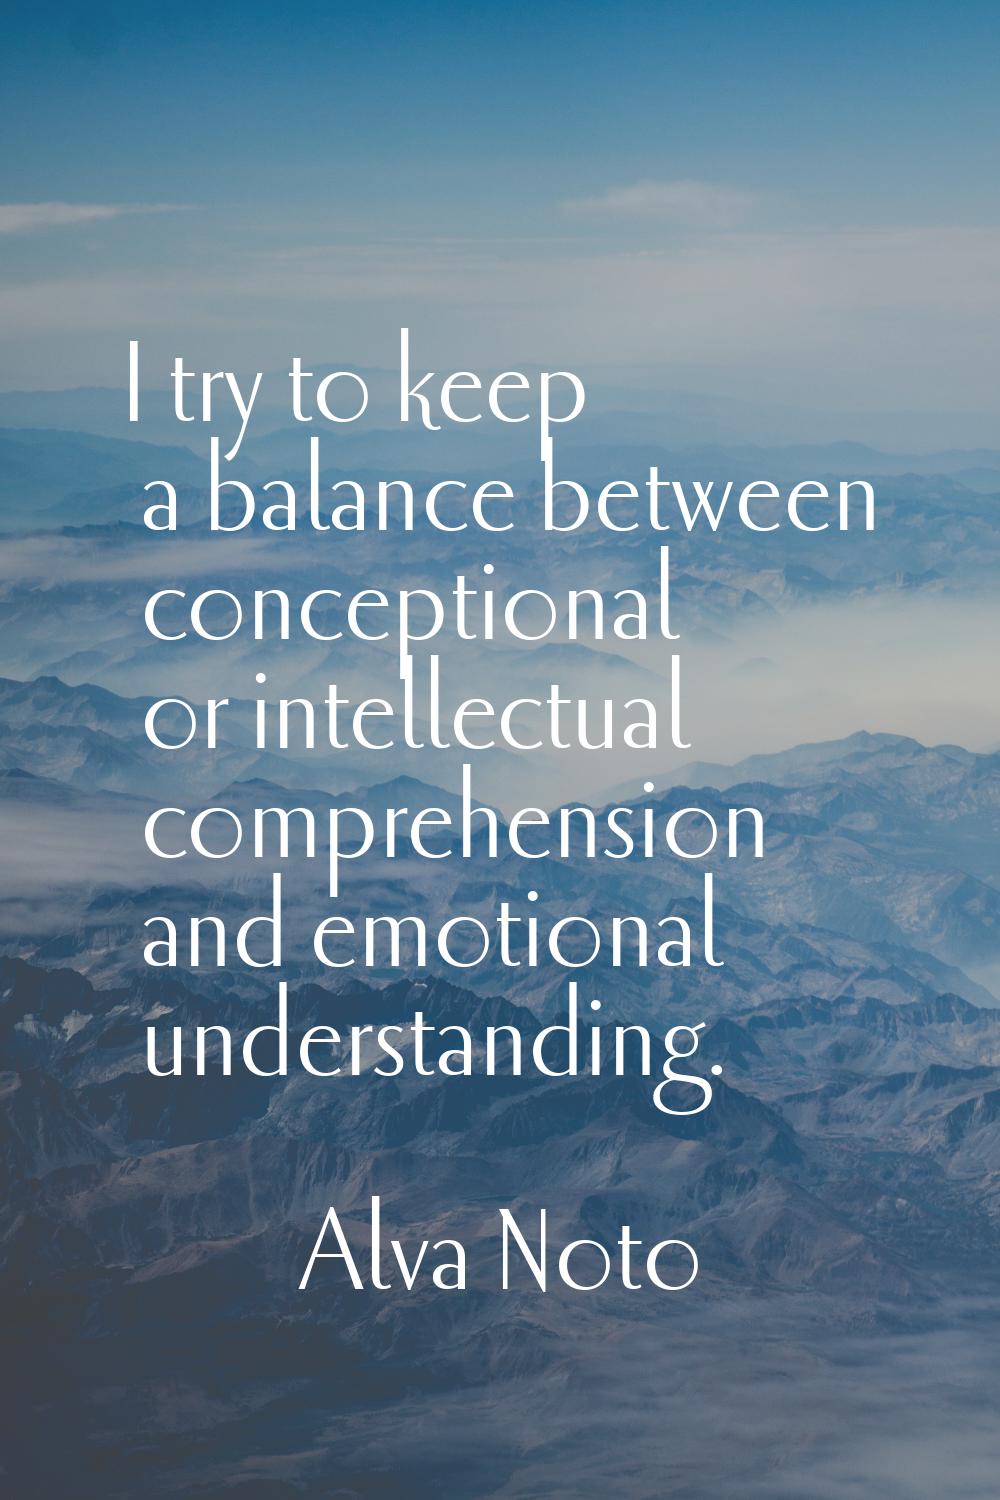 I try to keep a balance between conceptional or intellectual comprehension and emotional understand